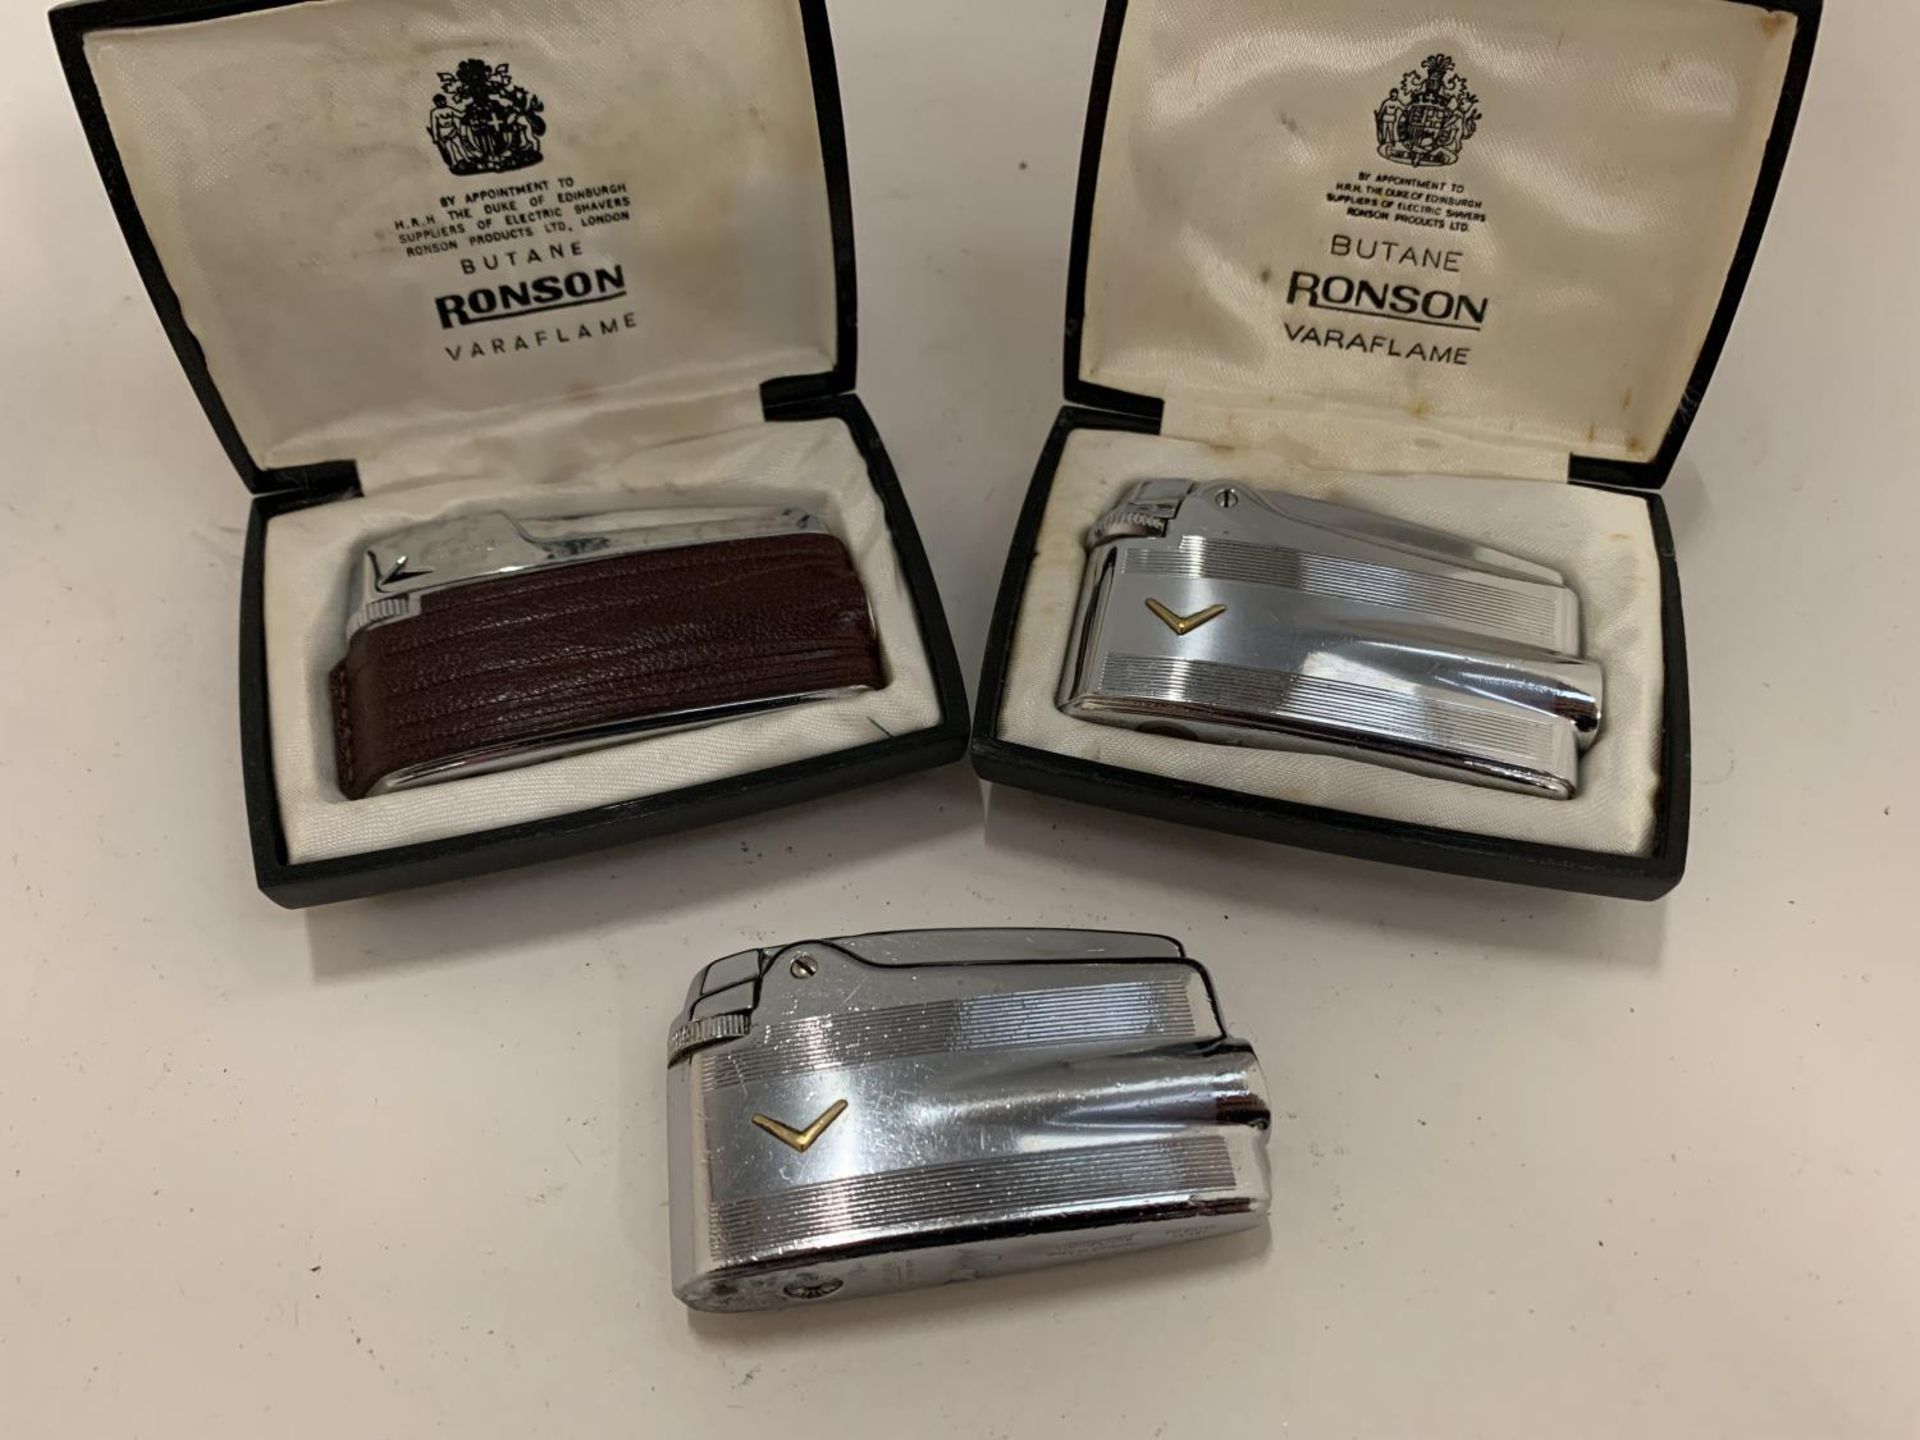 THREE RONSON LIGHTERS, TWO OF WHICH ARE BOXED - Image 2 of 2